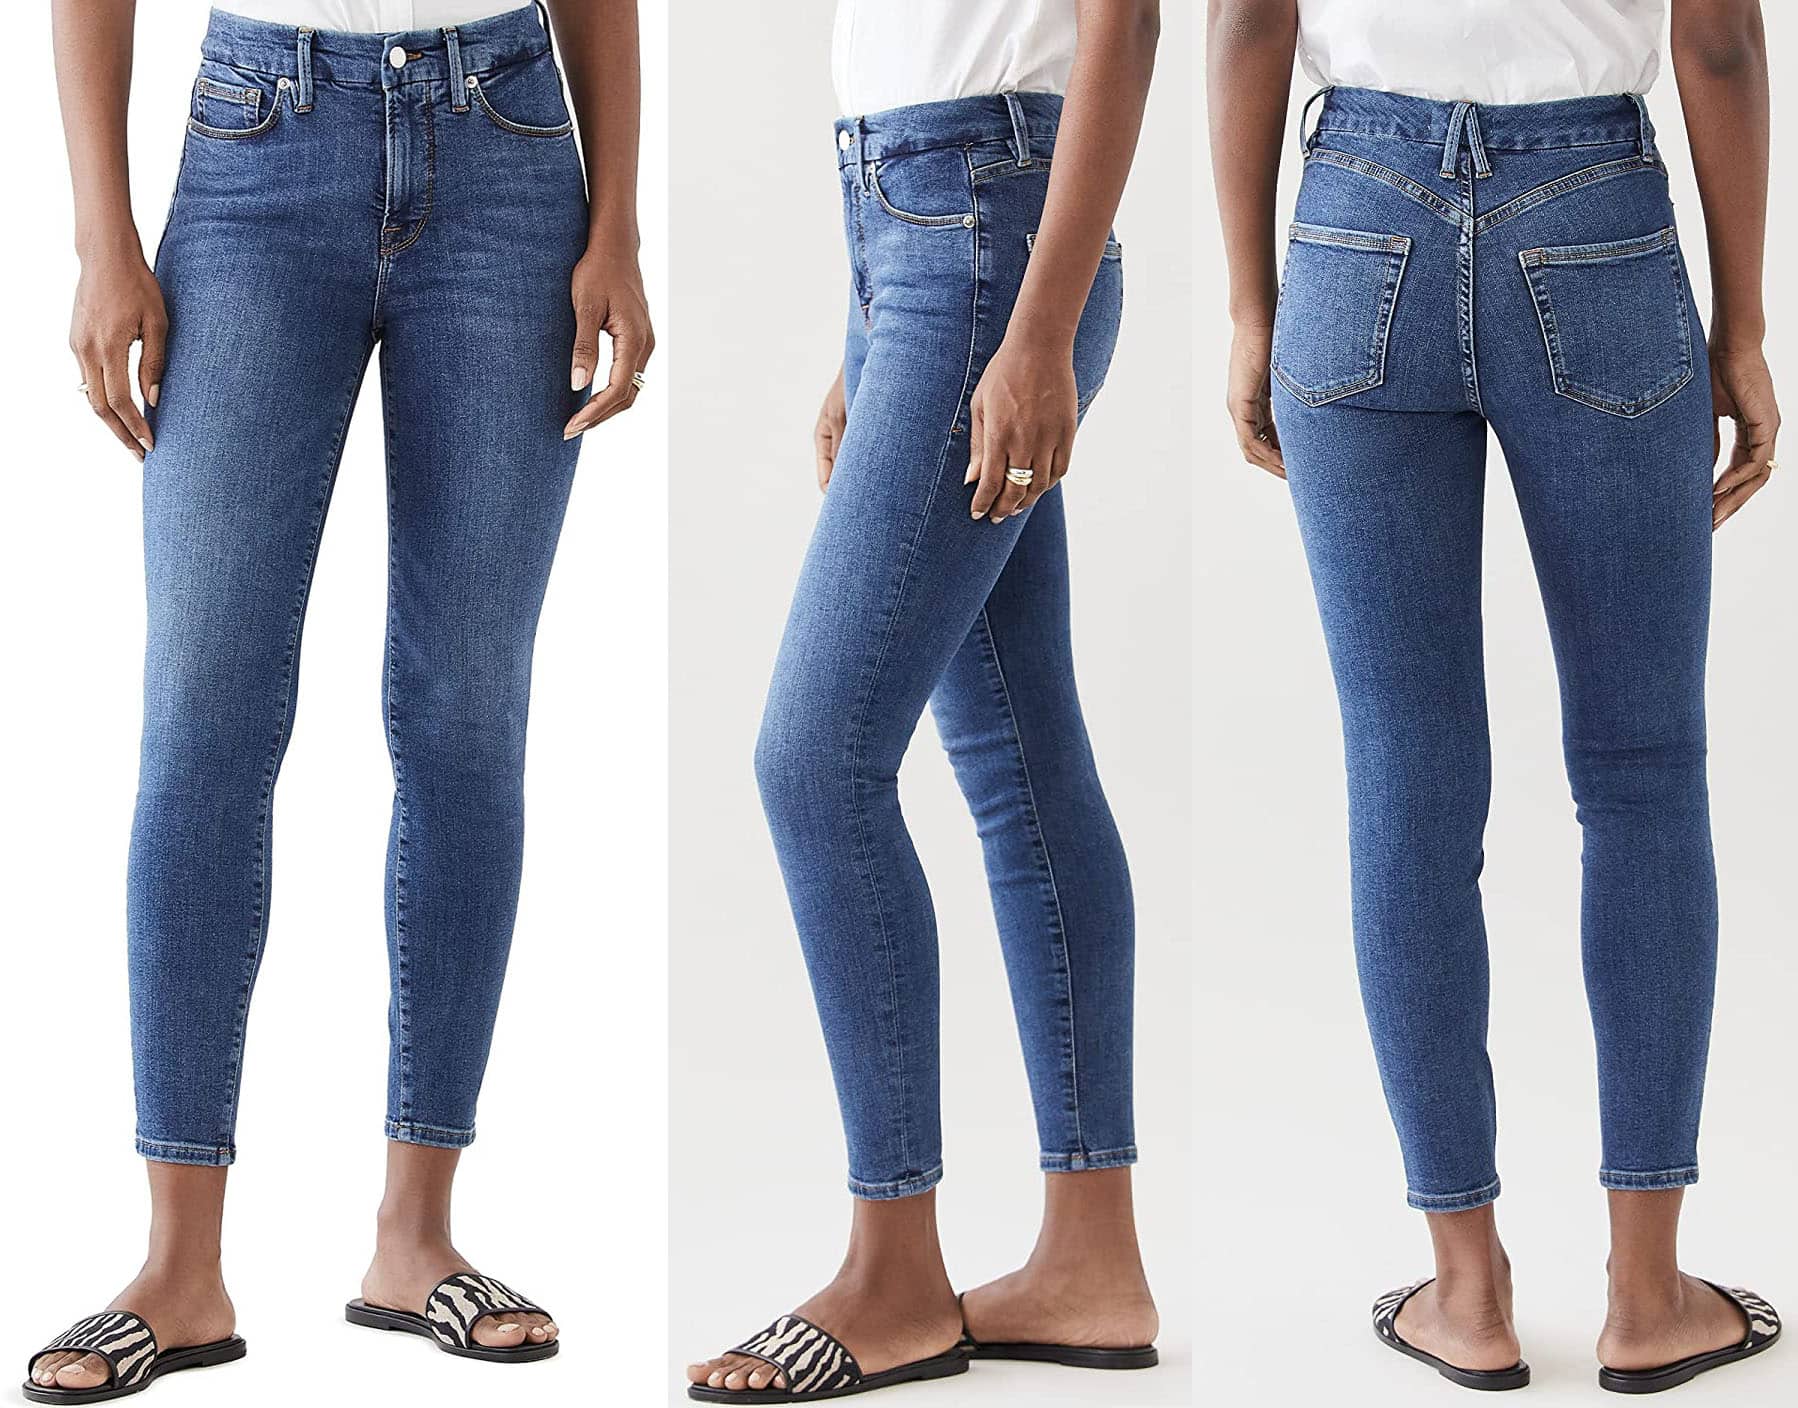 9 Flattering Jeans for Curvy Figures & Voluptuous Thighs